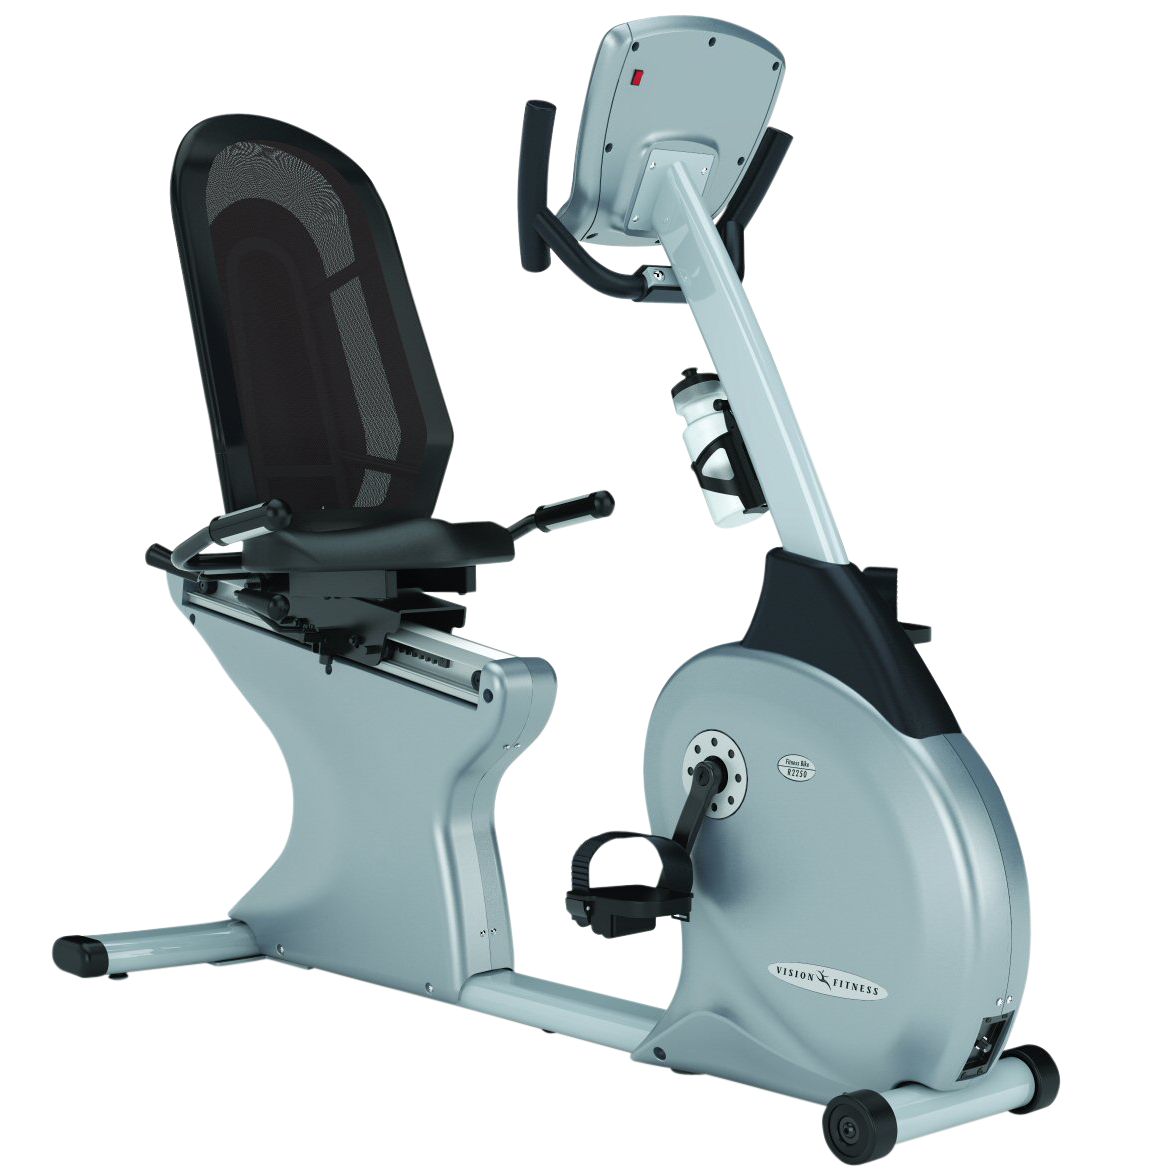 Vision Fitness R2250 Recumbent Exercise Bike with Deluxe Console at John Lewis